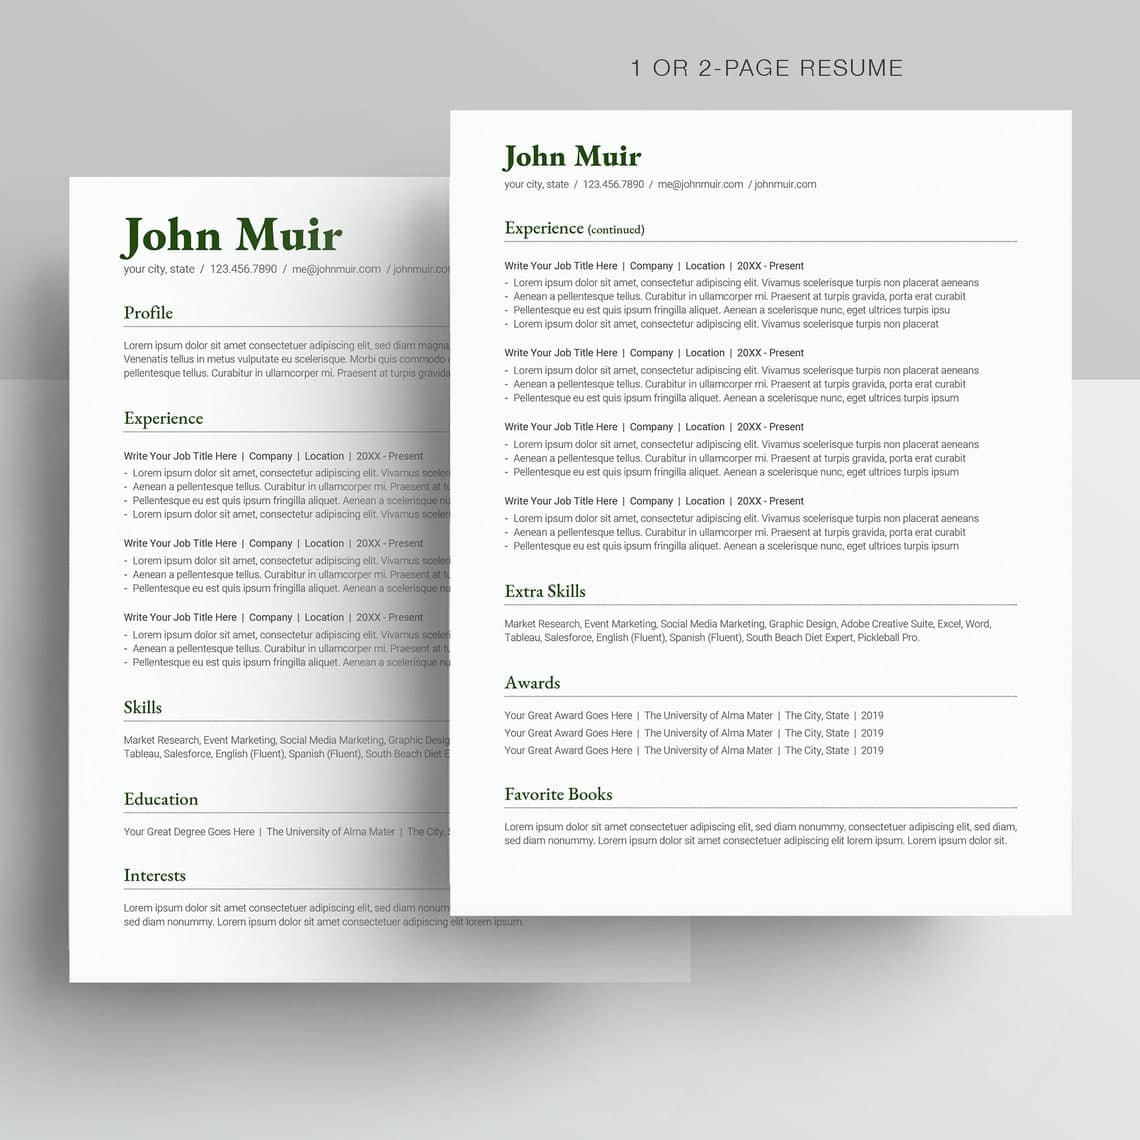 Google Docs Resume Template. Simple classic and ATS friendly